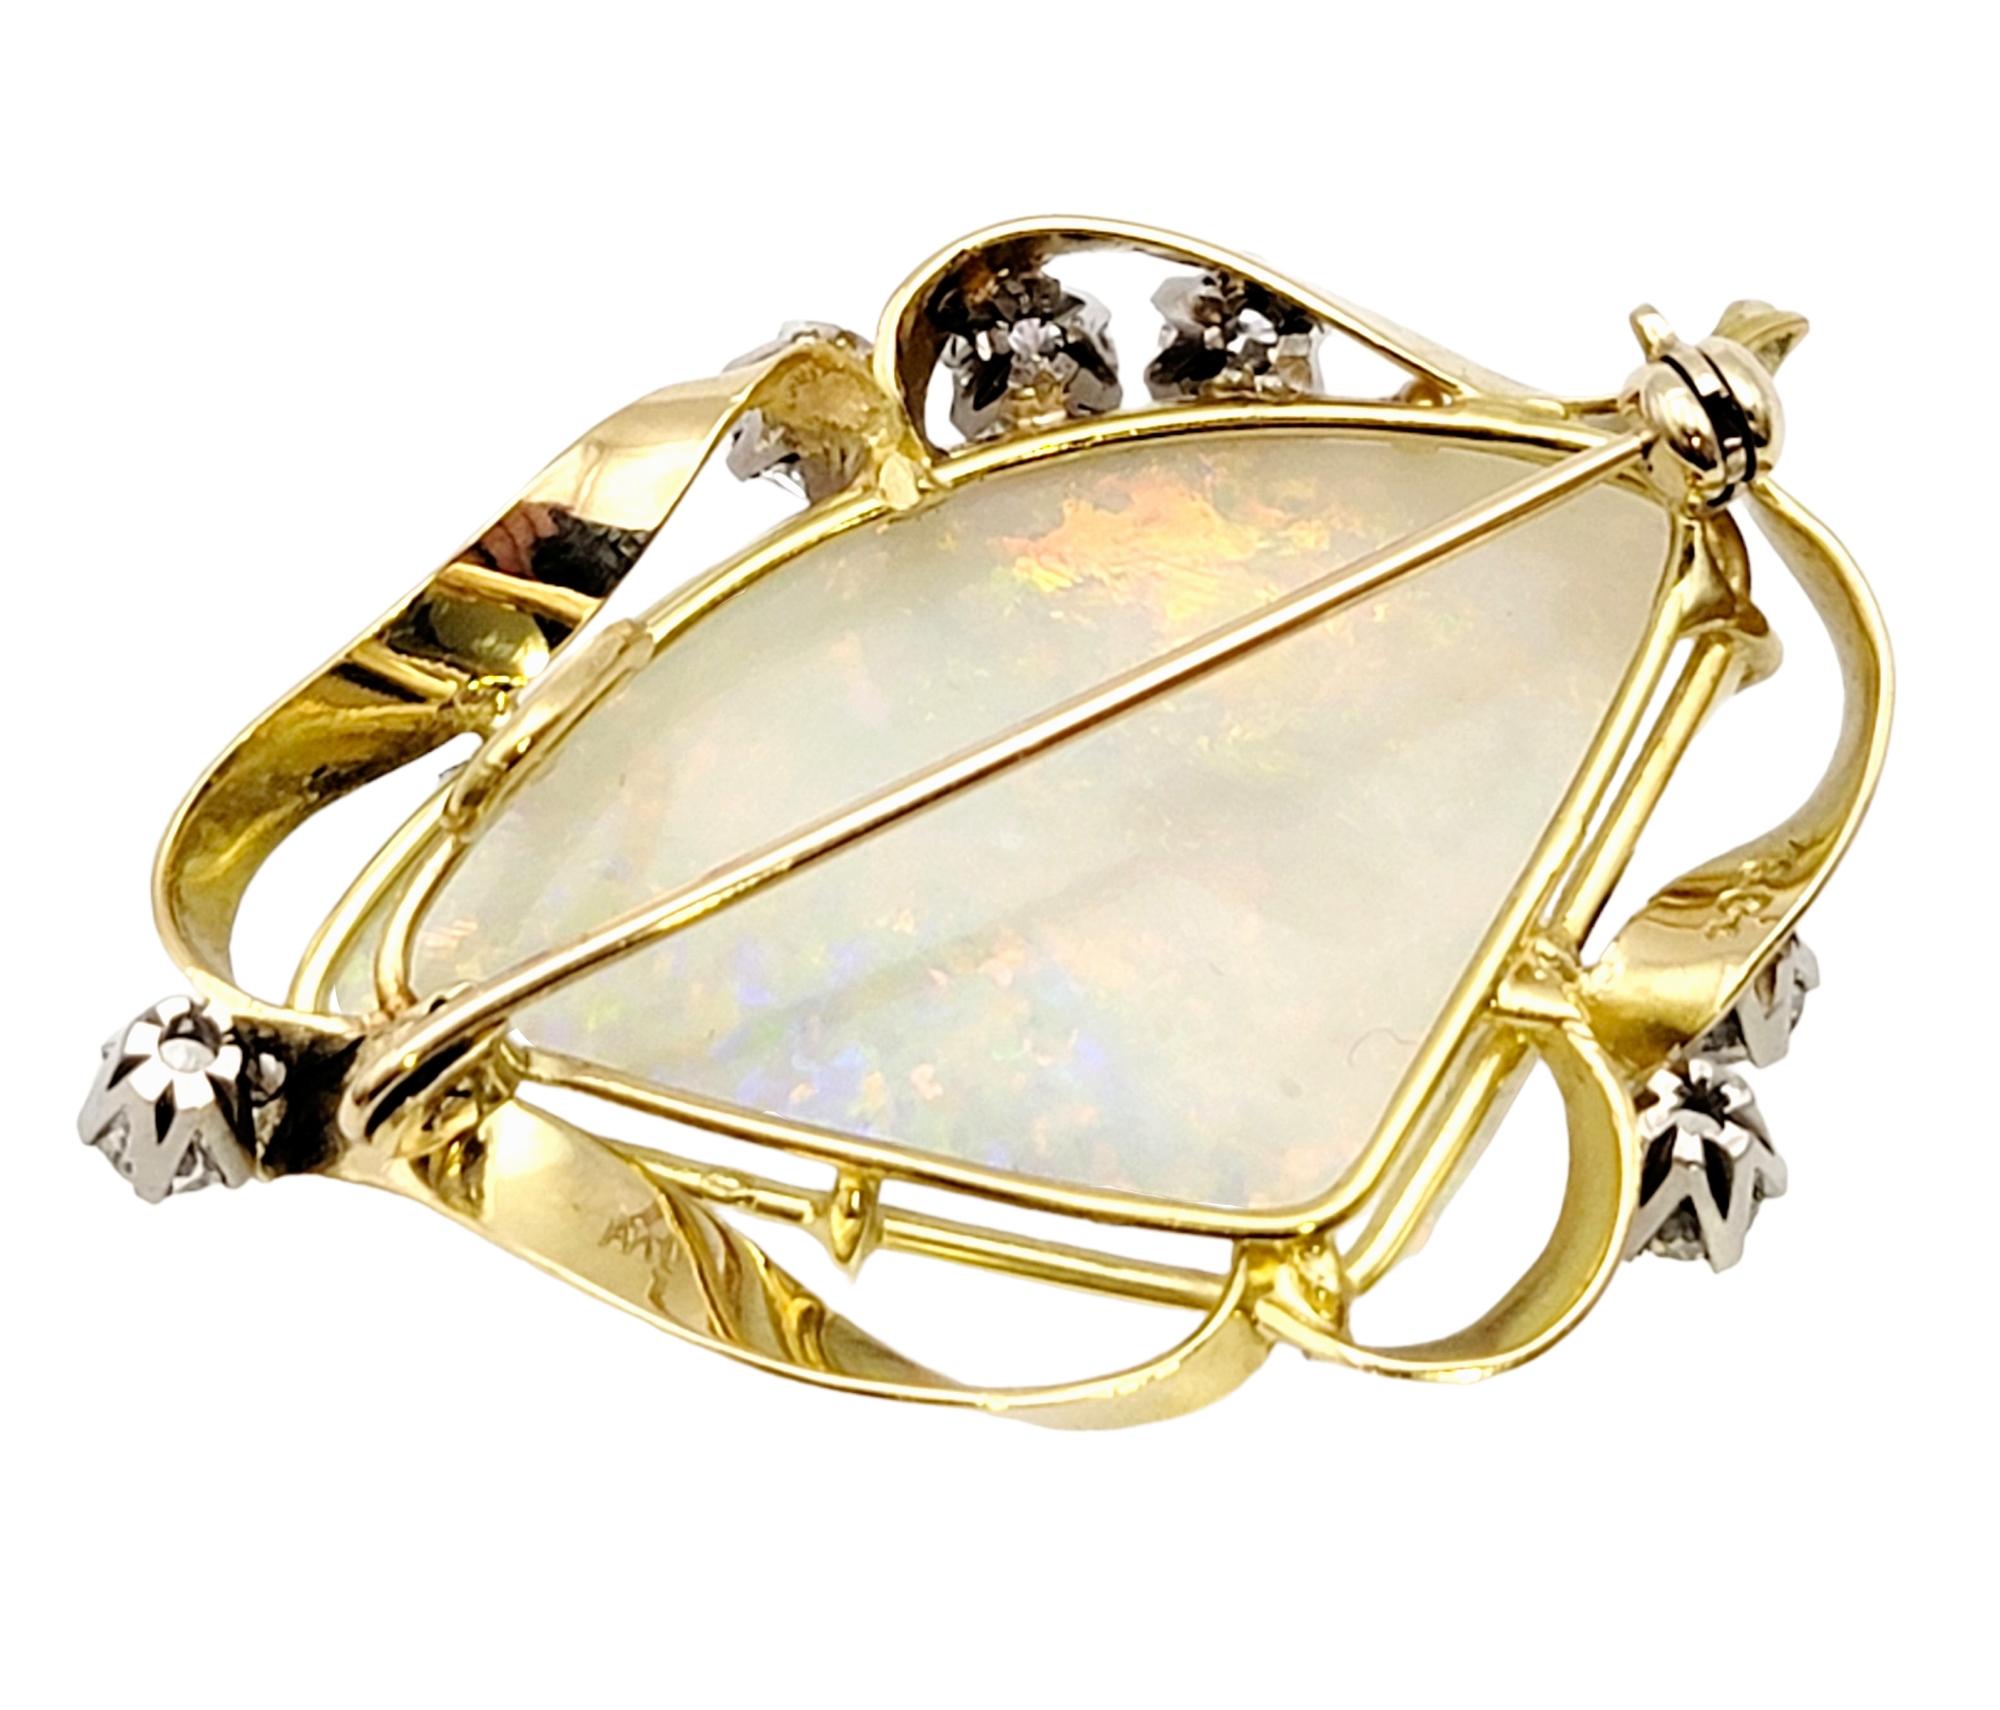 Triangle Cabochon White Opal Brooch / Pendant with Diamonds 18 Karat Yellow Gold For Sale 2